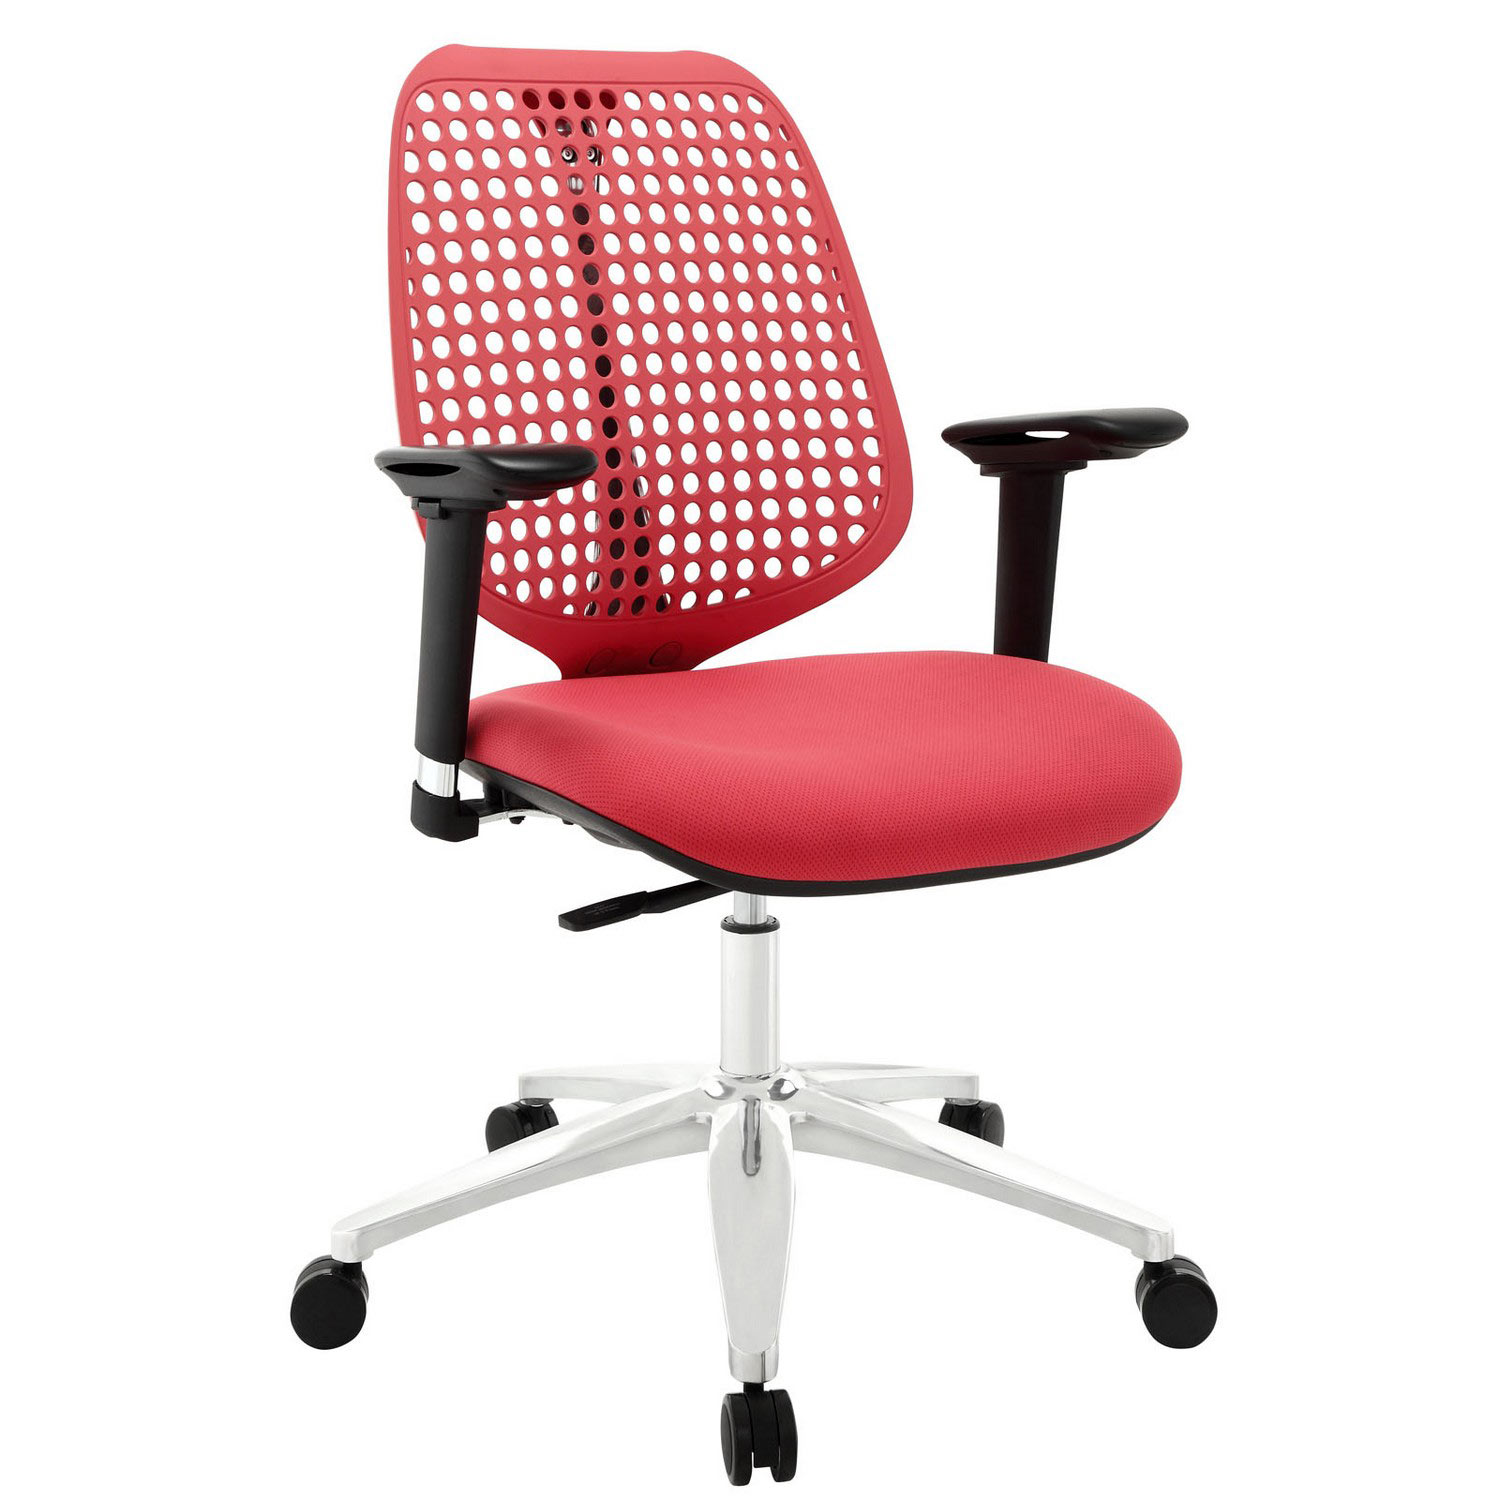 Modway Reverb Premium Office Chair - Red